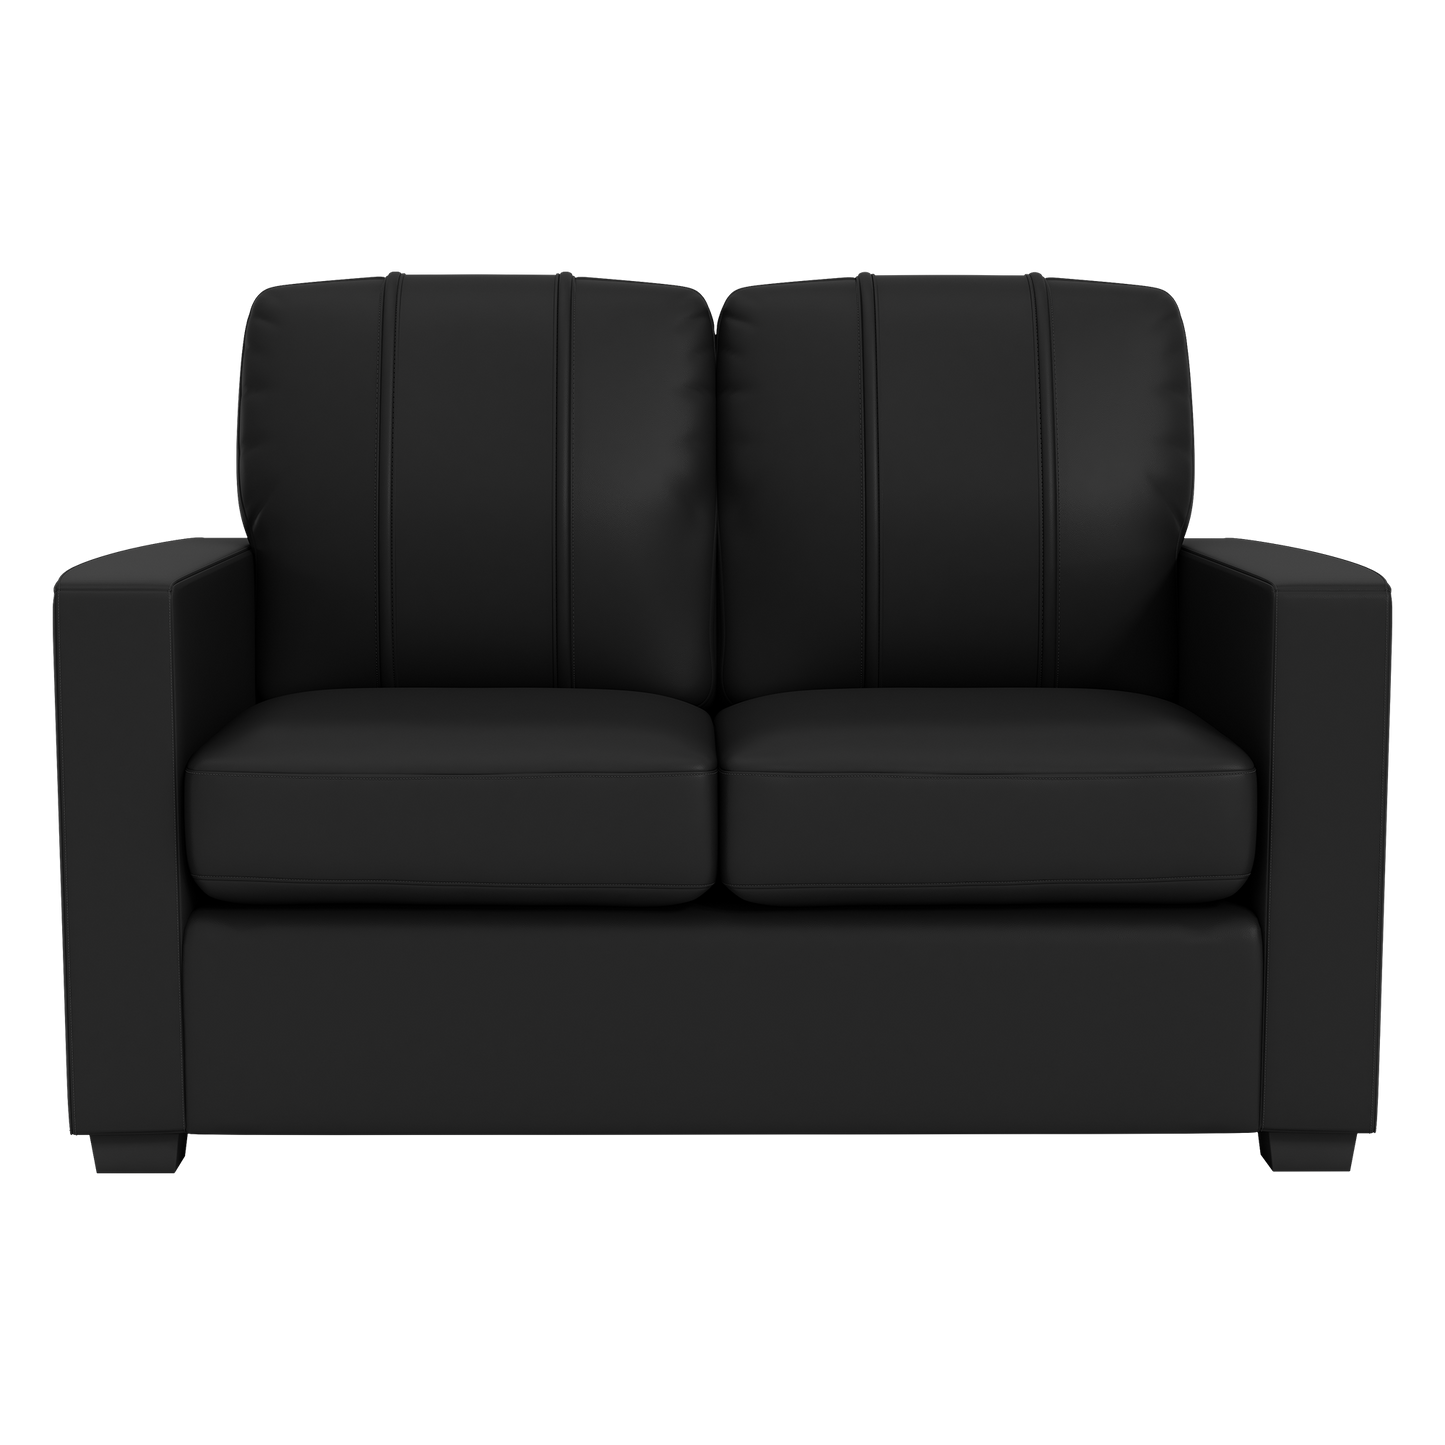 Silver Loveseat with  New York Giants Secondary Logo